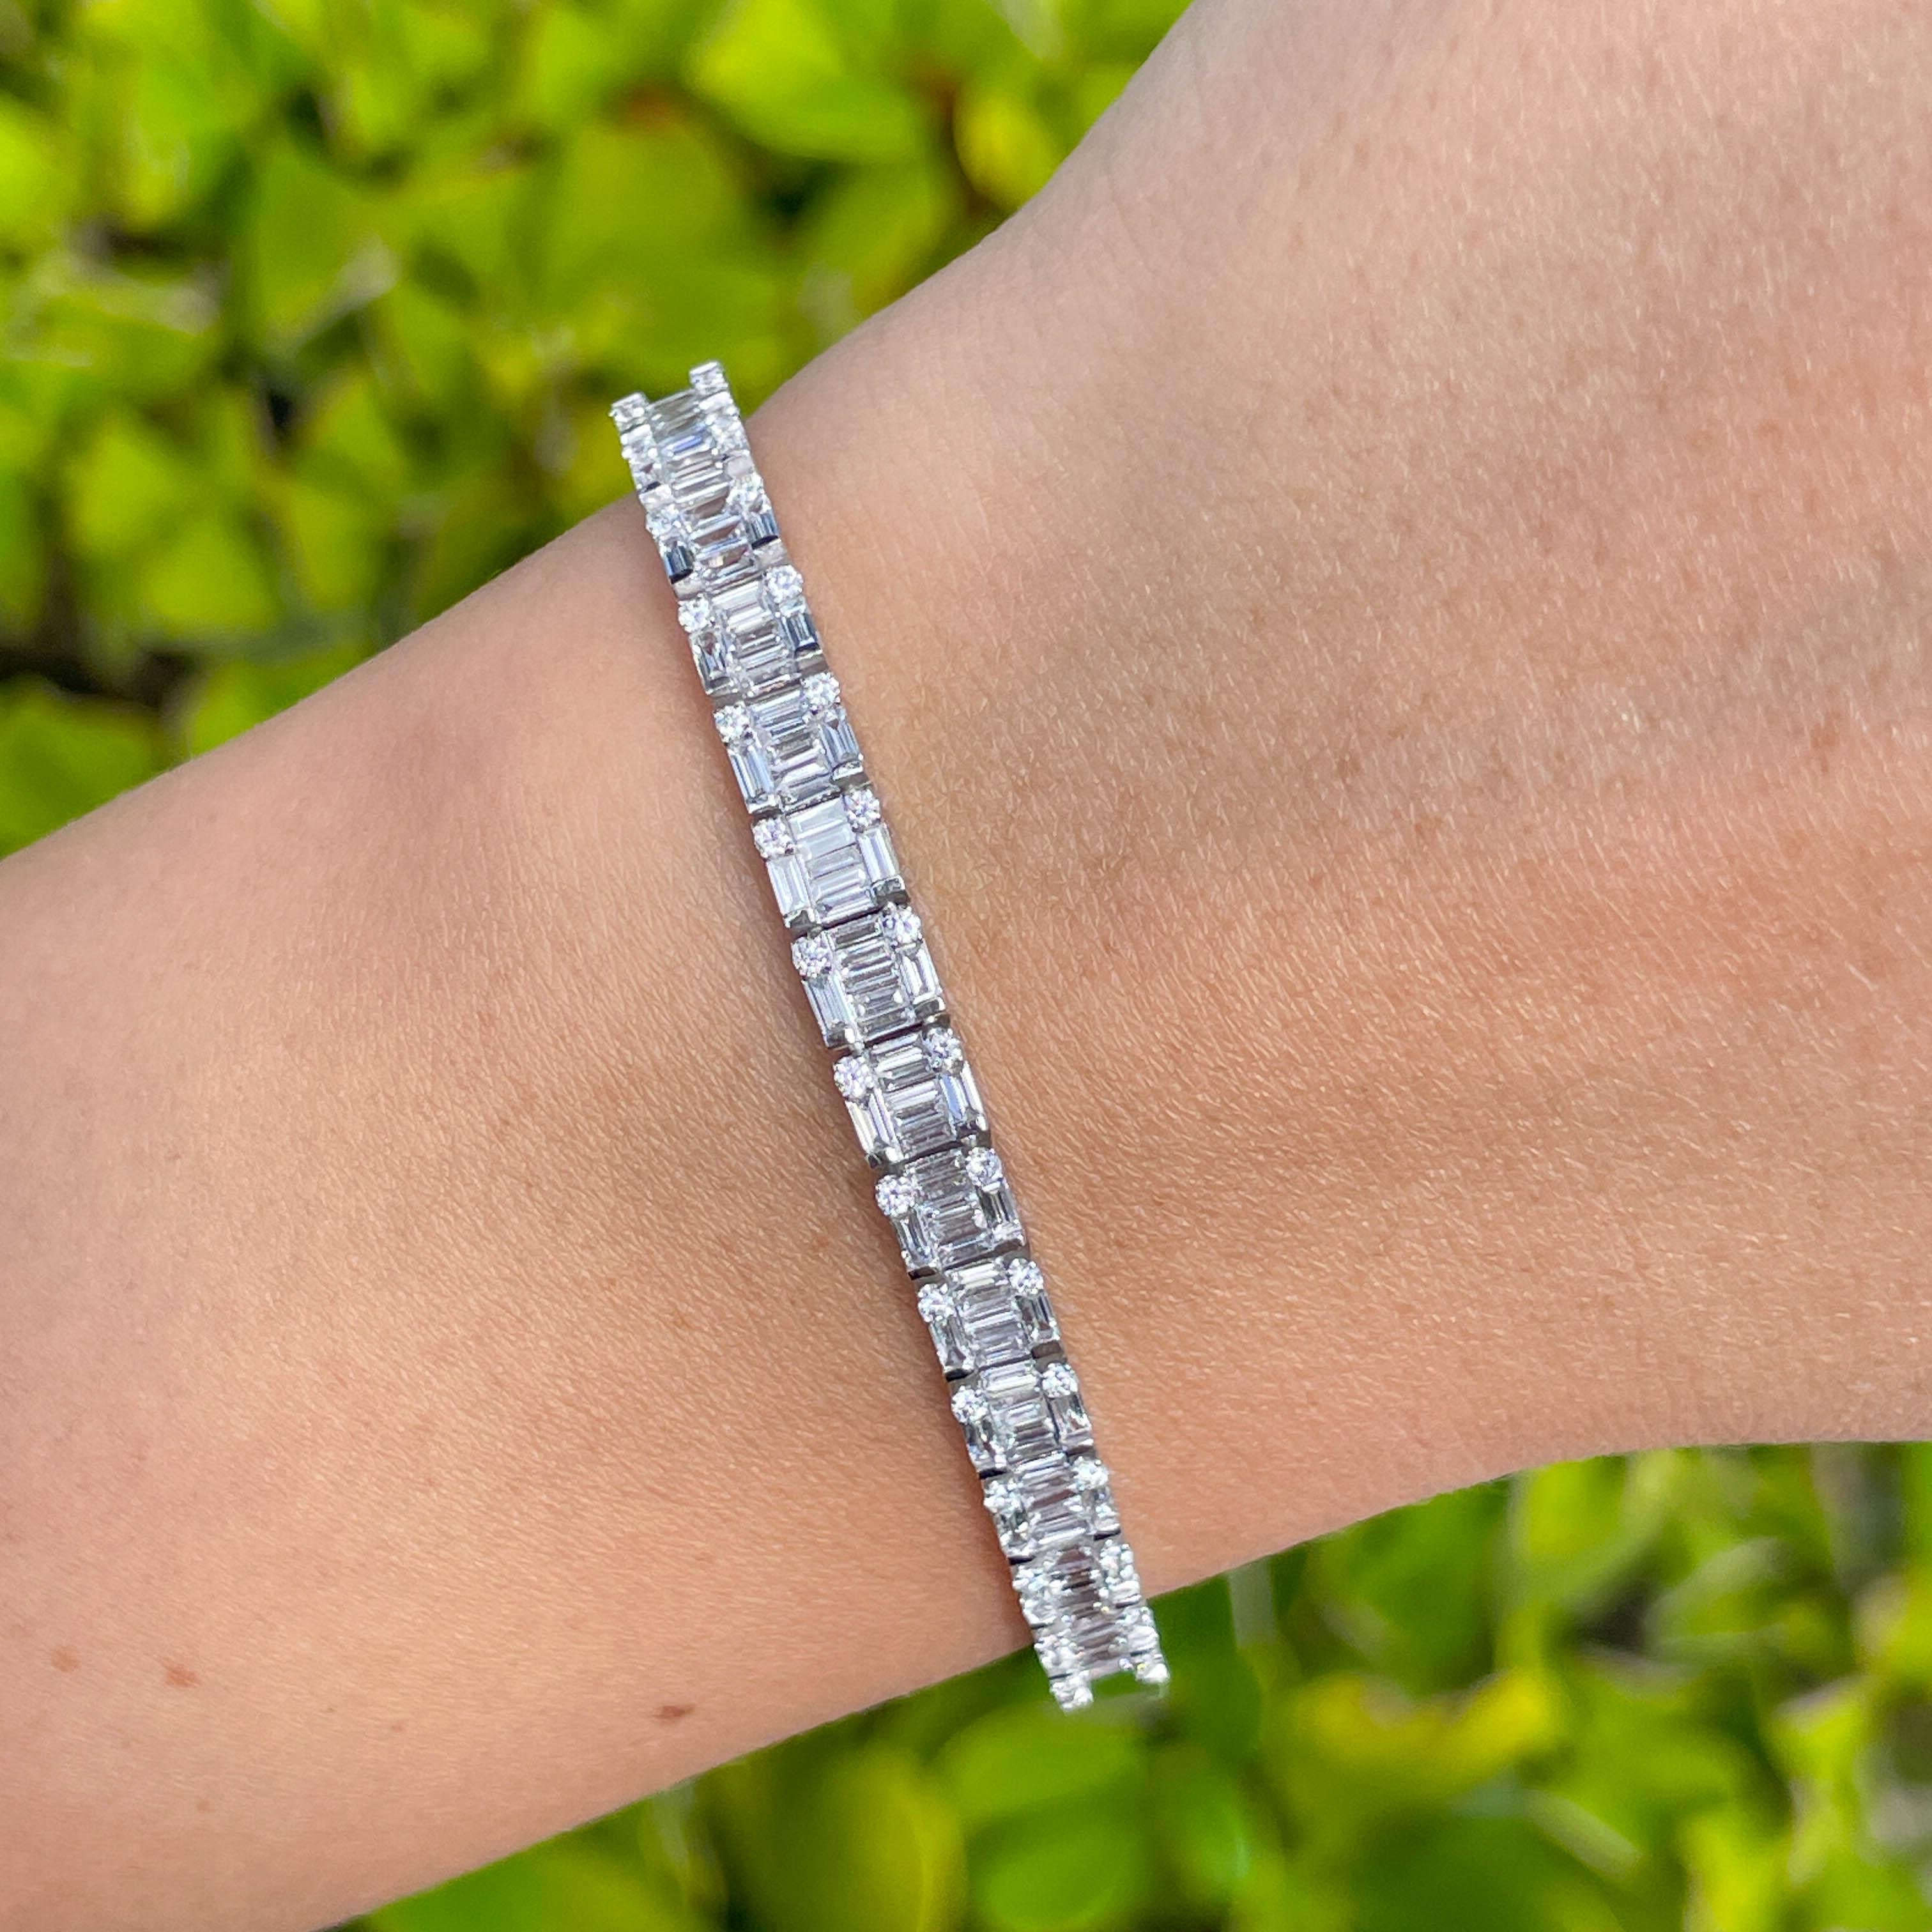 Jay Feder 18k White Gold Diamond Baguette Cluster Tennis Bracelet

Set with 78 round and 244 baguette diamonds; total carat weight is 4.95ctw.

The bracelet is 7 inches long and 4.87mm wide. Total weight is 16.5 grams.

Please view our photos and